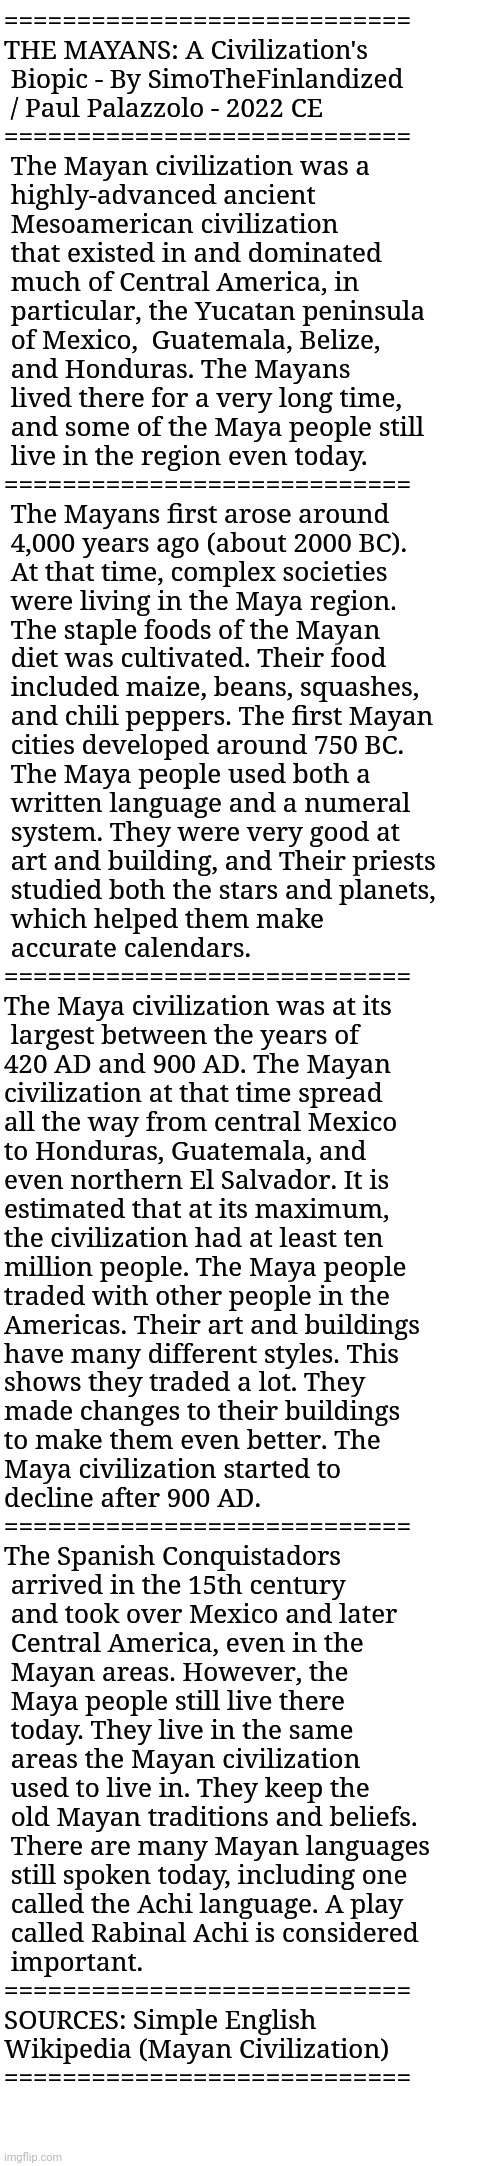 THE MAYANS: A Civilization's Biopic - By SimoTheFinlandized / Paul Palazzolo - 2022 CE | ============================
THE MAYANS: A Civilization's 
 Biopic - By SimoTheFinlandized 
 / Paul Palazzolo - 2022 CE
============================
 The Mayan civilization was a
 highly-advanced ancient
 Mesoamerican civilization 
 that existed in and dominated 
 much of Central America, in
 particular, the Yucatan peninsula 
 of Mexico,  Guatemala, Belize, 
 and Honduras. The Mayans
 lived there for a very long time, 
 and some of the Maya people still 
 live in the region even today.
============================
 The Mayans first arose around 
 4,000 years ago (about 2000 BC). 
 At that time, complex societies 
 were living in the Maya region. 
 The staple foods of the Mayan 
 diet was cultivated. Their food
 included maize, beans, squashes, 
 and chili peppers. The first Mayan
 cities developed around 750 BC.
 The Maya people used both a 
 written language and a numeral
 system. They were very good at 
 art and building, and Their priests
 studied both the stars and planets,
 which helped them make 
 accurate calendars.
============================
The Maya civilization was at its
 largest between the years of 
420 AD and 900 AD. The Mayan 
civilization at that time spread
all the way from central Mexico 
to Honduras, Guatemala, and
even northern El Salvador. It is
estimated that at its maximum, 
the civilization had at least ten 
million people. The Maya people
traded with other people in the
Americas. Their art and buildings 
have many different styles. This
shows they traded a lot. They 
made changes to their buildings 
to make them even better. The 
Maya civilization started to 
decline after 900 AD.
============================
The Spanish Conquistadors 
 arrived in the 15th century 
 and took over Mexico and later
 Central America, even in the 
 Mayan areas. However, the 
 Maya people still live there 
 today. They live in the same 
 areas the Mayan civilization 
 used to live in. They keep the 
 old Mayan traditions and beliefs.
 There are many Mayan languages
 still spoken today, including one
 called the Achi language. A play
 called Rabinal Achi is considered
 important.
============================
SOURCES: Simple English 
Wikipedia (Mayan Civilization)
============================ | image tagged in simothefinlandized,maya,native american,civilization,essay,world history | made w/ Imgflip meme maker